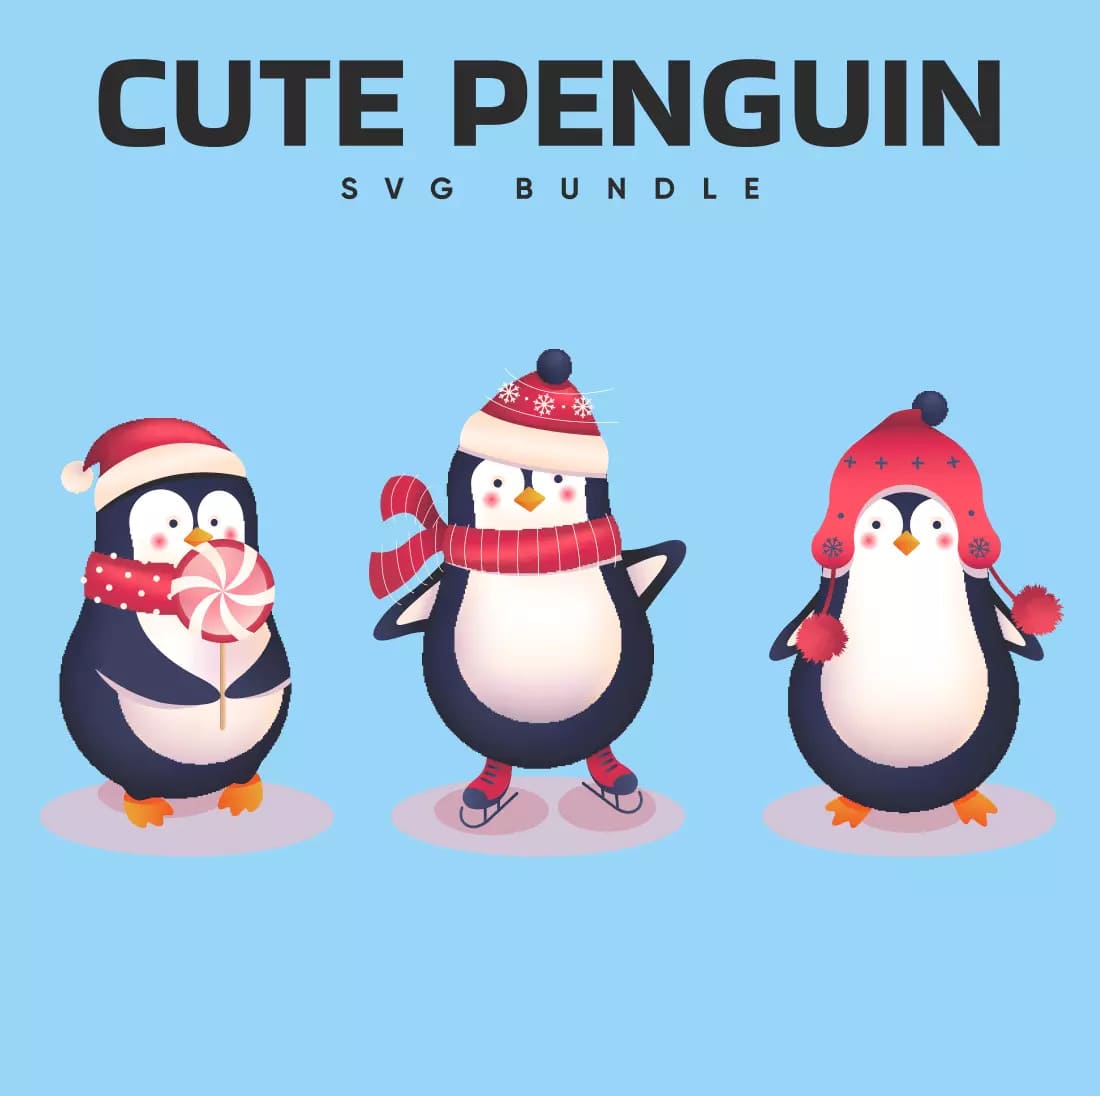 Group of penguins wearing hats and scarfs.